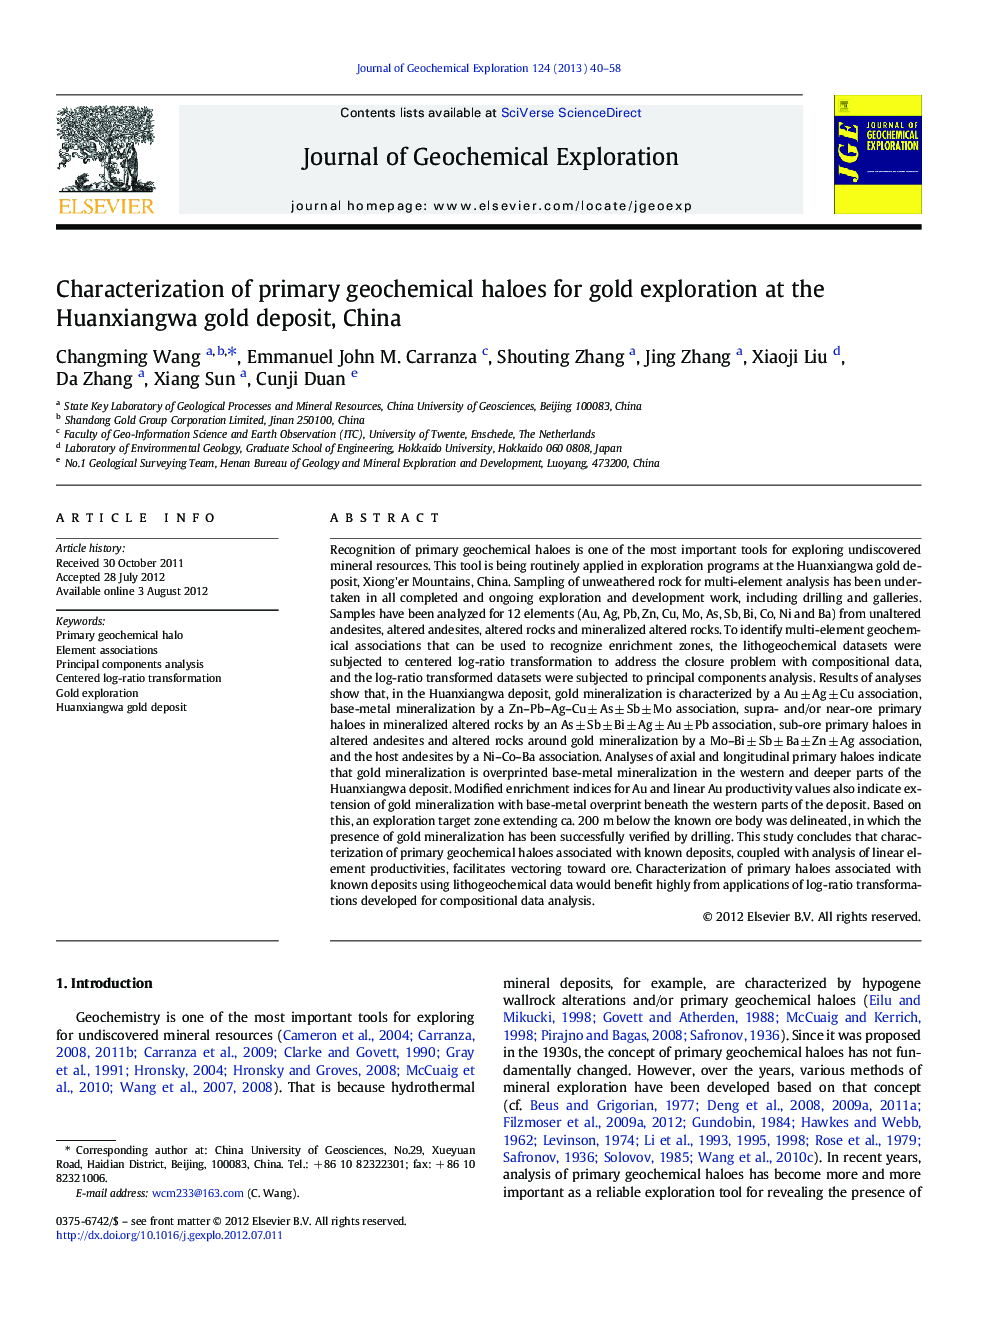 Characterization of primary geochemical haloes for gold exploration at the Huanxiangwa gold deposit, China